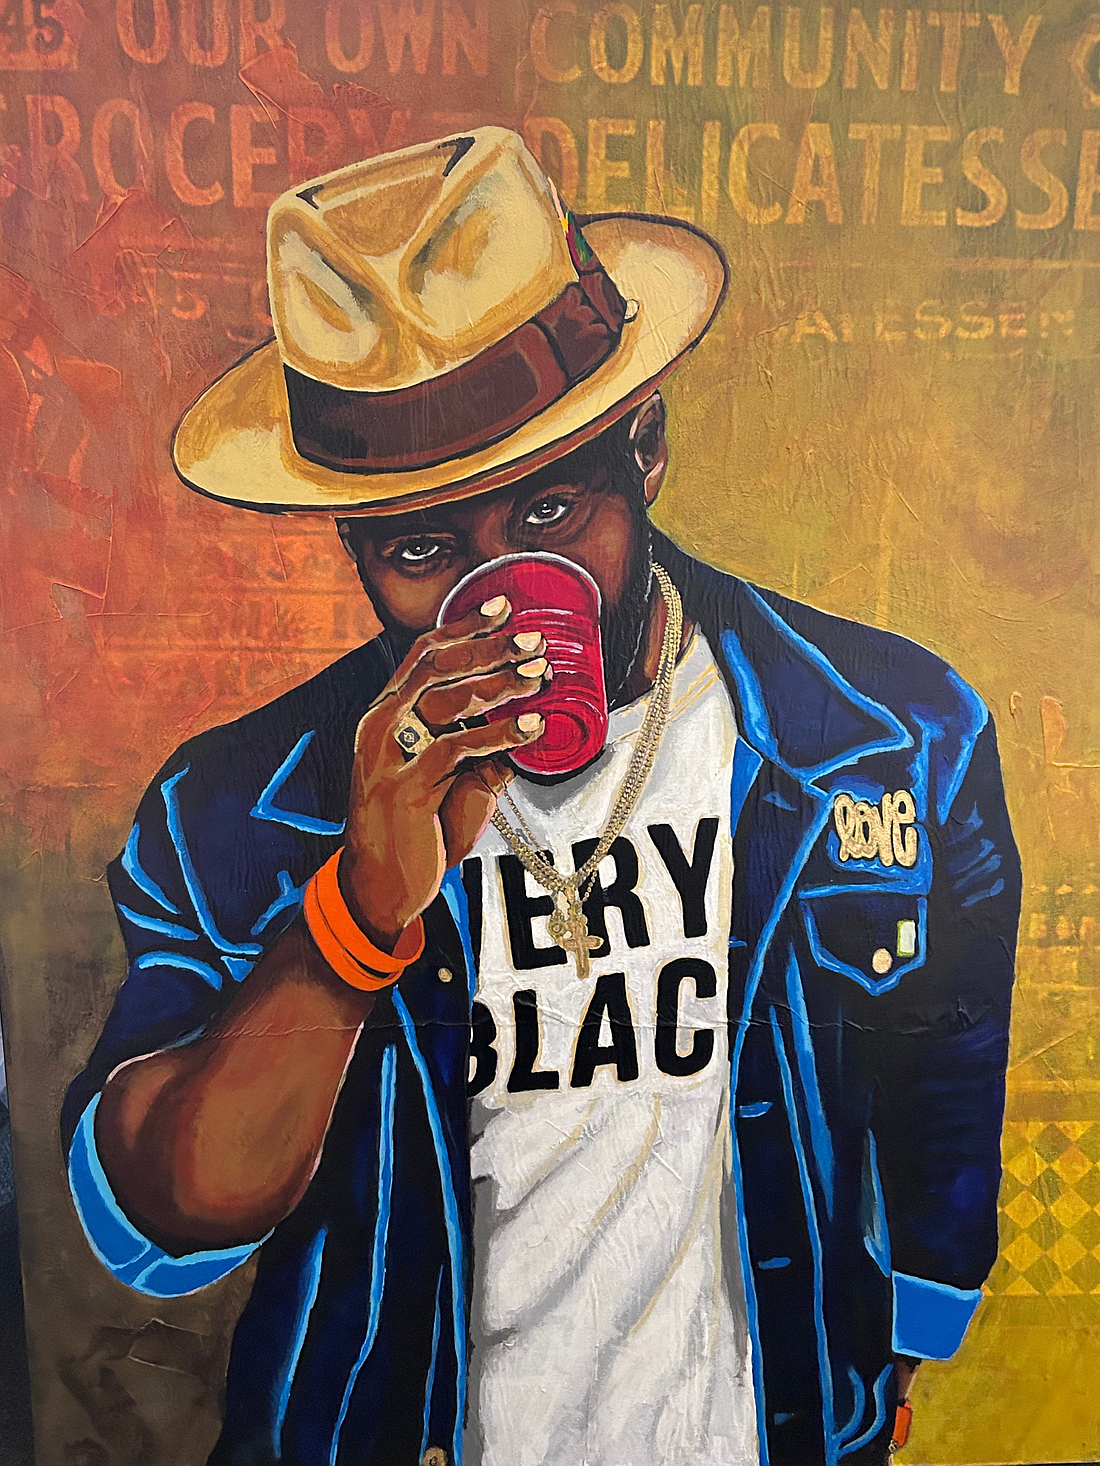 Demarcus McGaughey is one of the artworks in the exhibit “Black Artists in the Spotlight” at the Rye Arts Center thru Feb. 29. See Exhibits below for details.